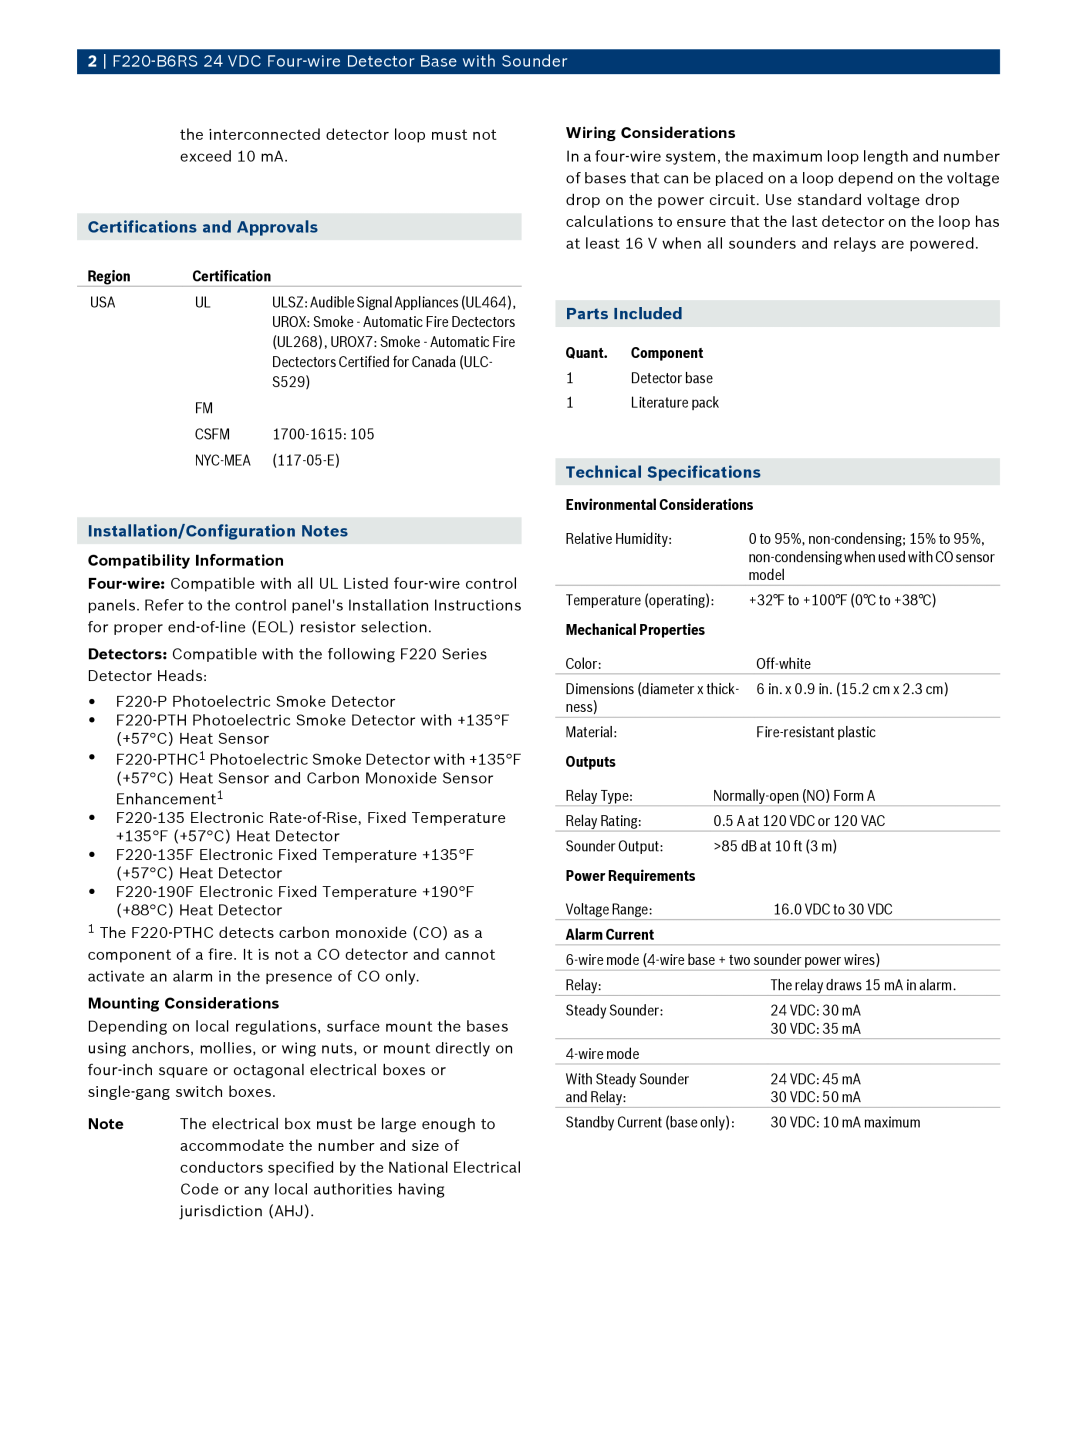 Bosch Appliances F220B6RS Certifications and Approvals, Installation/Configuration Notes, Parts Included 